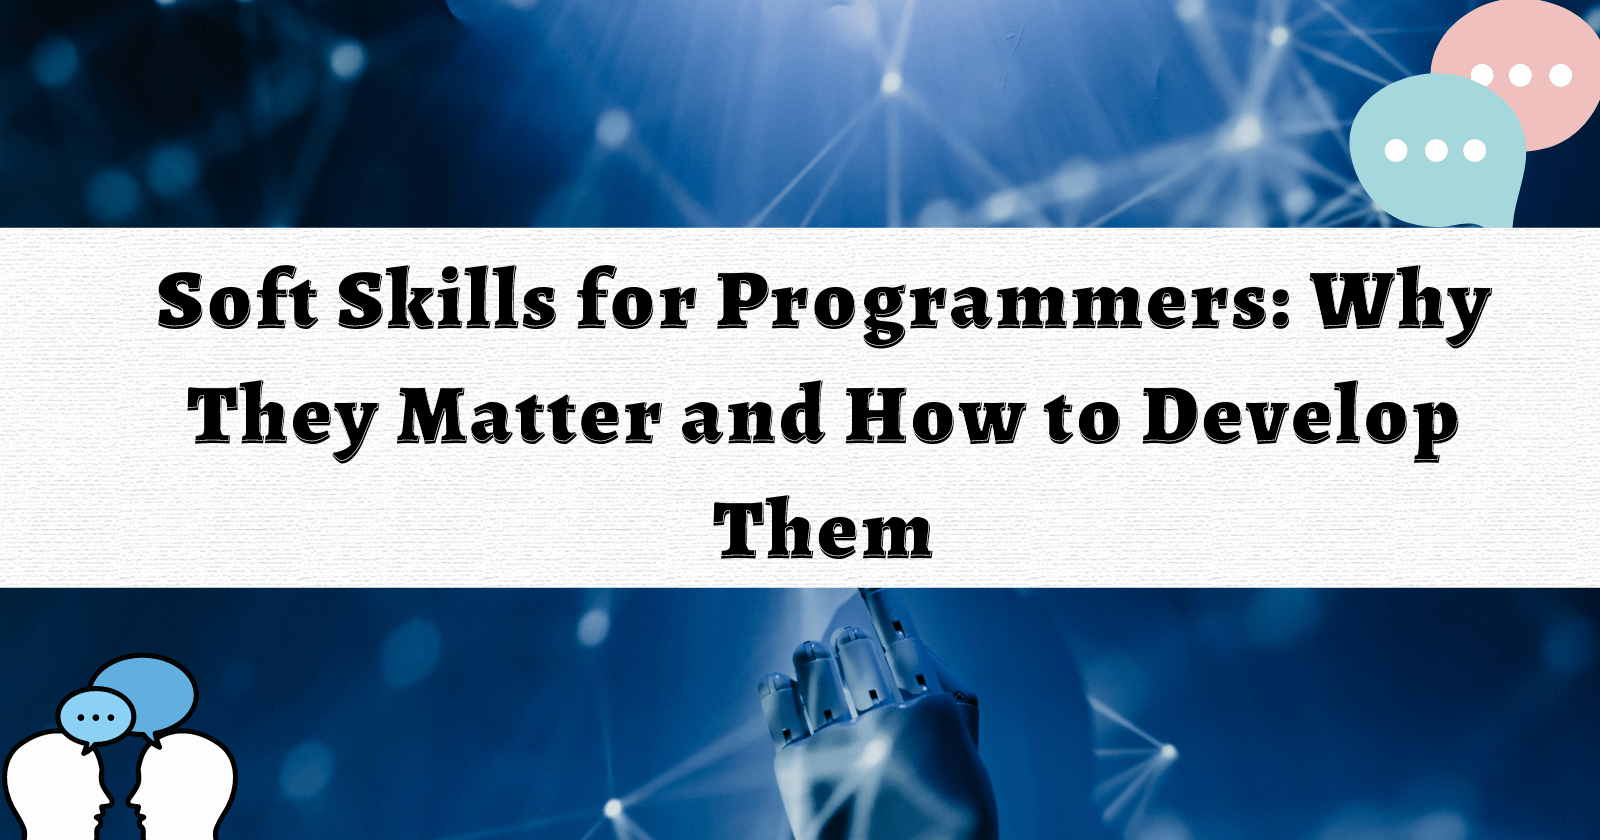 Cover Image for Soft Skills for Programmers: Why They Matter and How to Develop Them